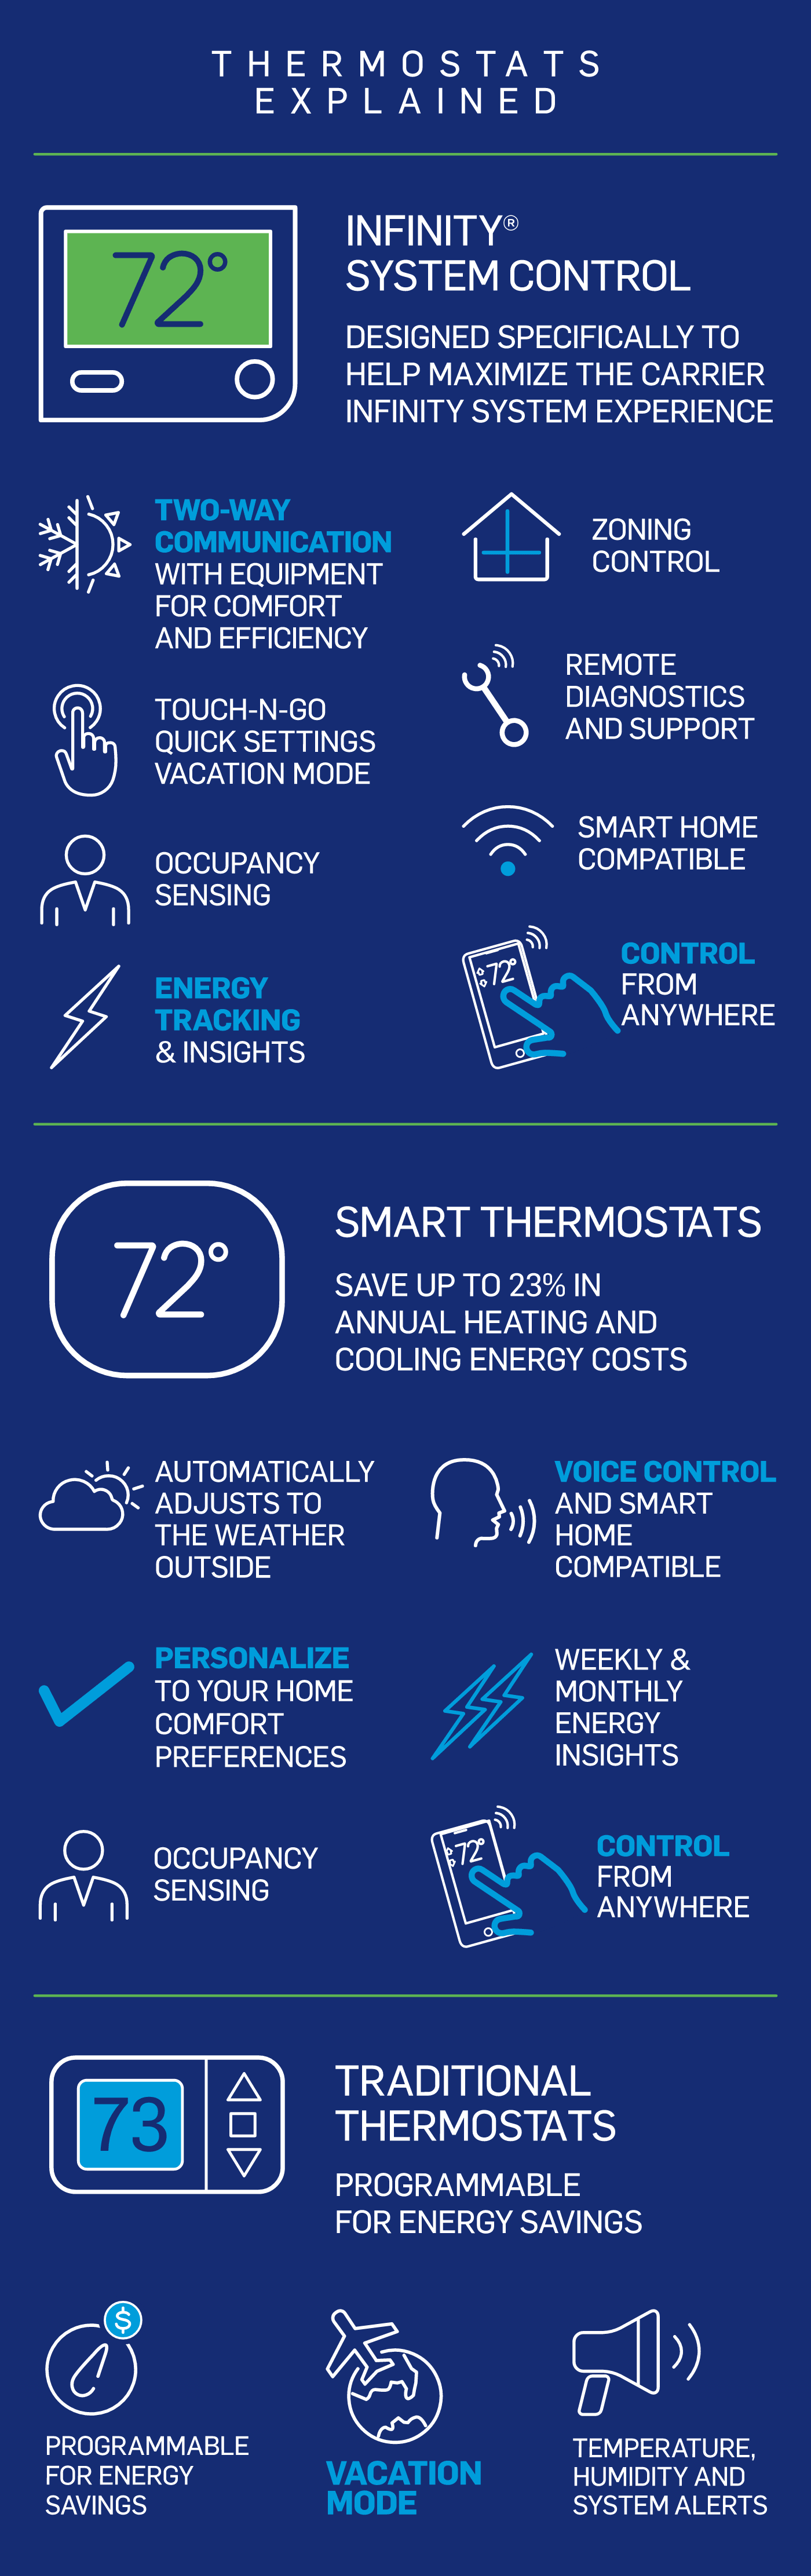 carrier-thermostats-explained-infographic-mb